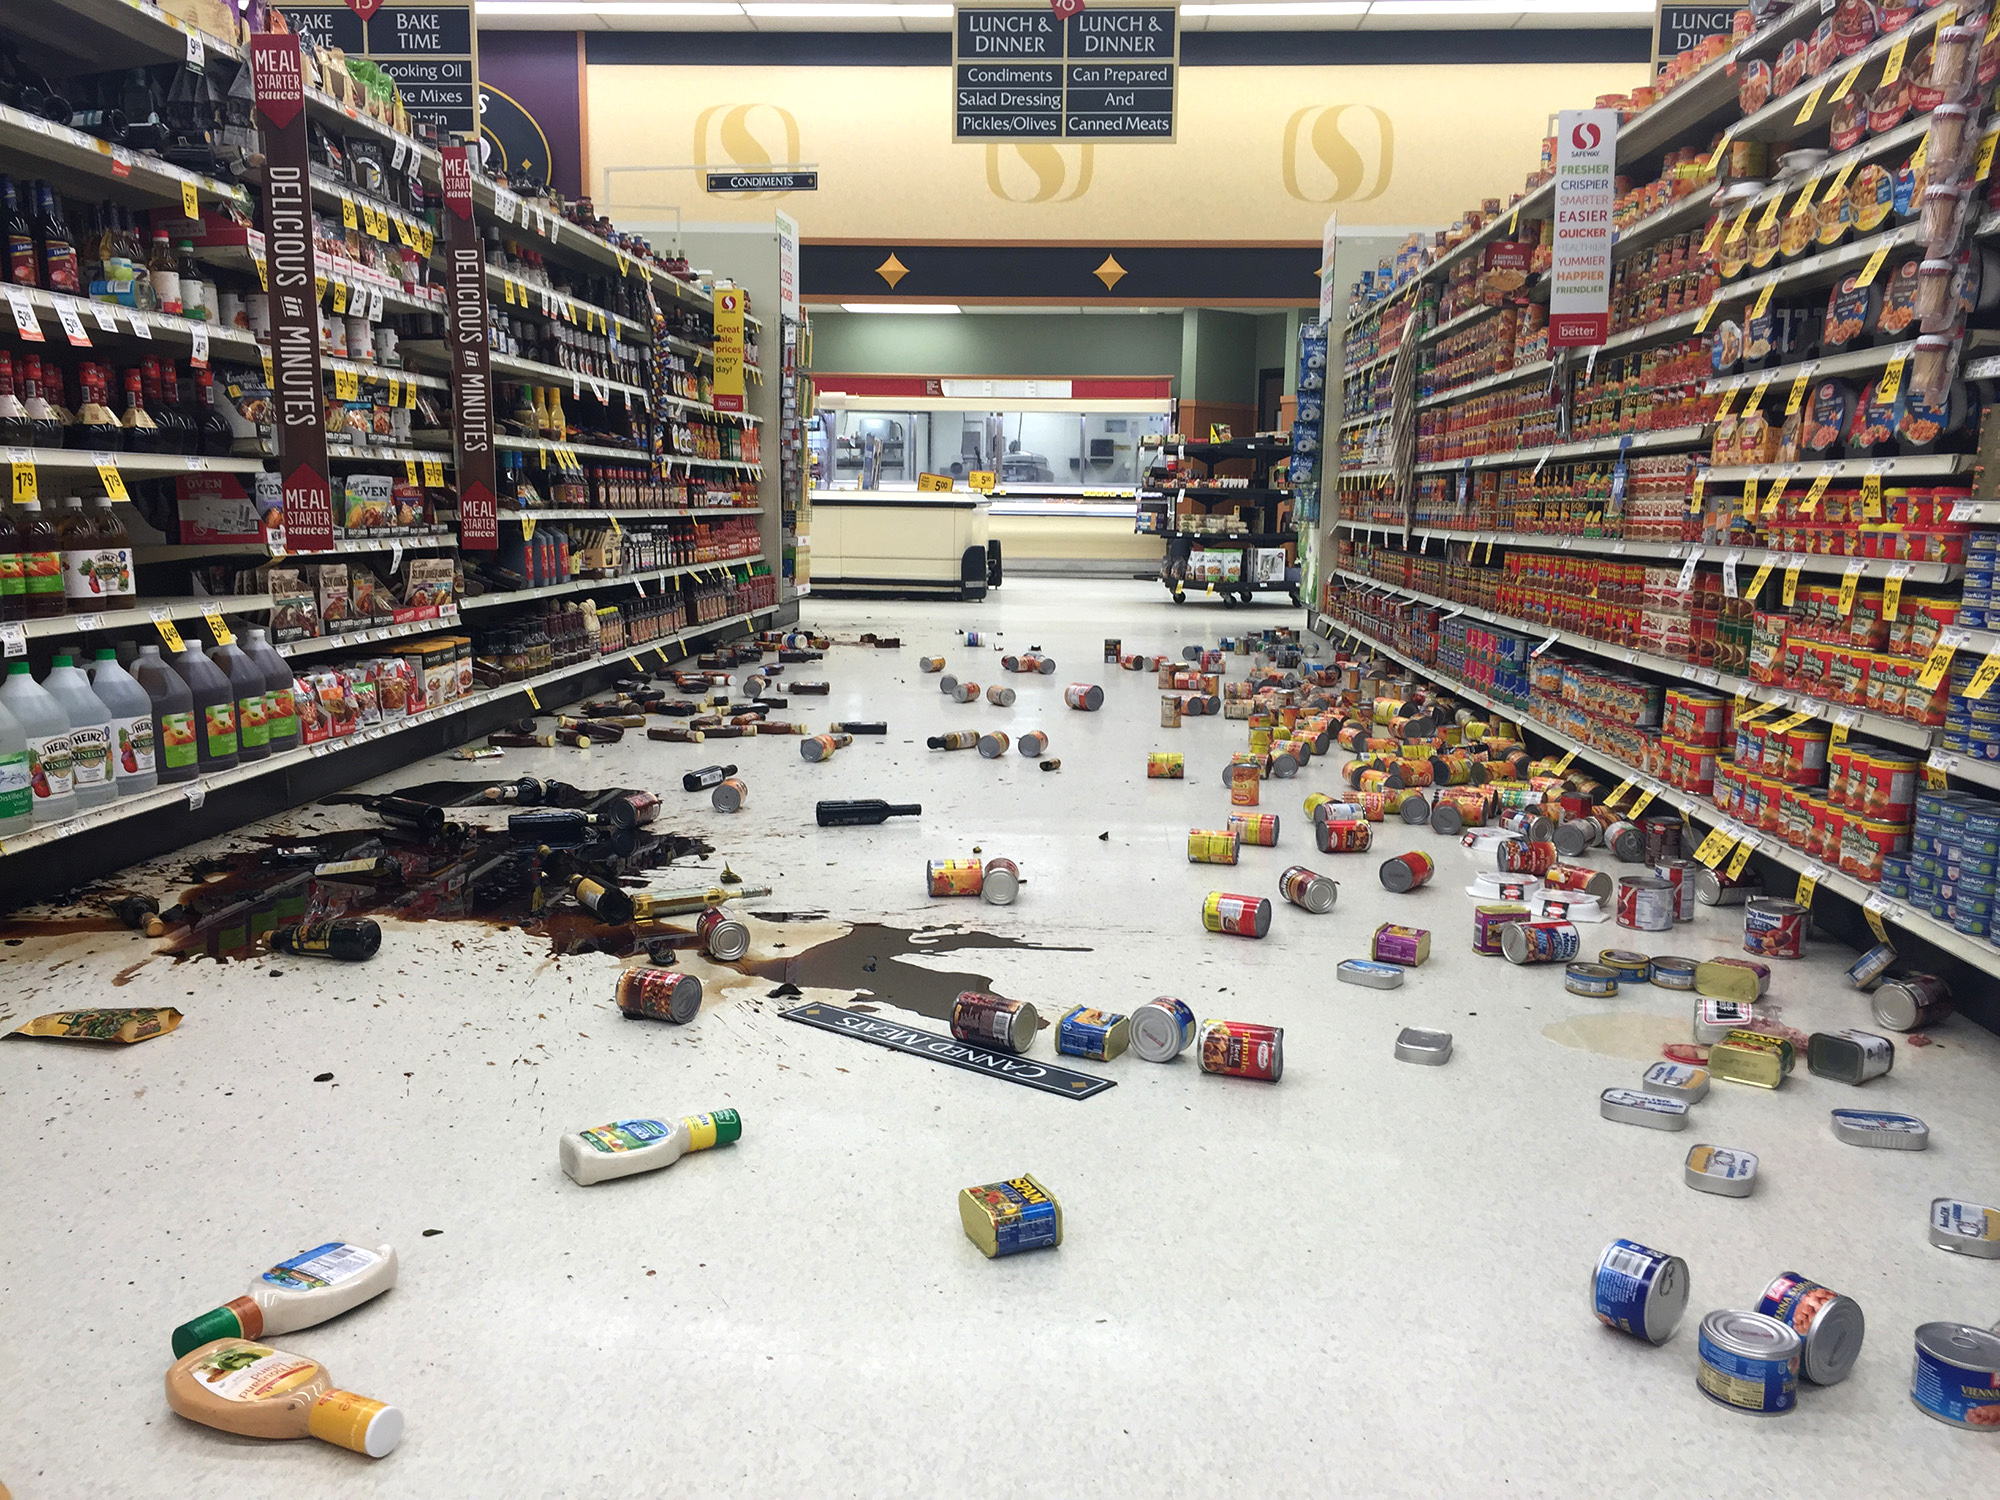 Items fallen from the shelves litter the aisles inside a Safeway grocery store following a magnitude 6.8 earthquake on Sunday in south-central Alaska. The quake knocked items off shelves and walls and jolted the nerves of residents in this earthquake prone region